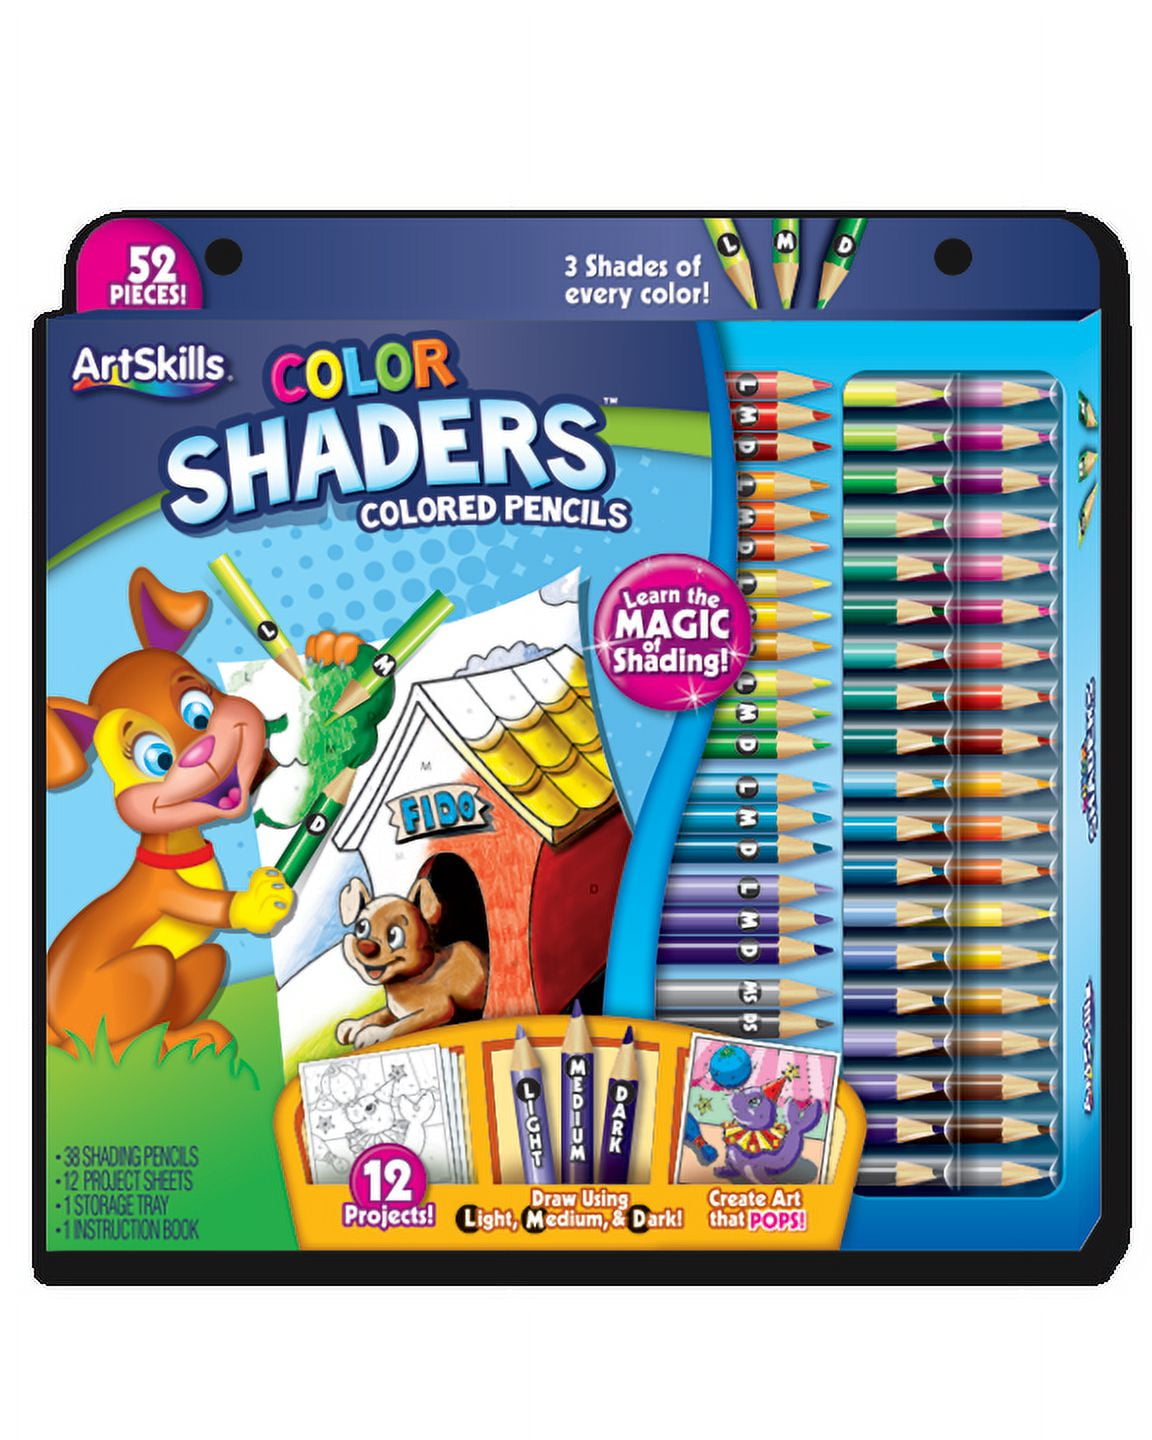 How to Teach Kids to use Colored Pencils